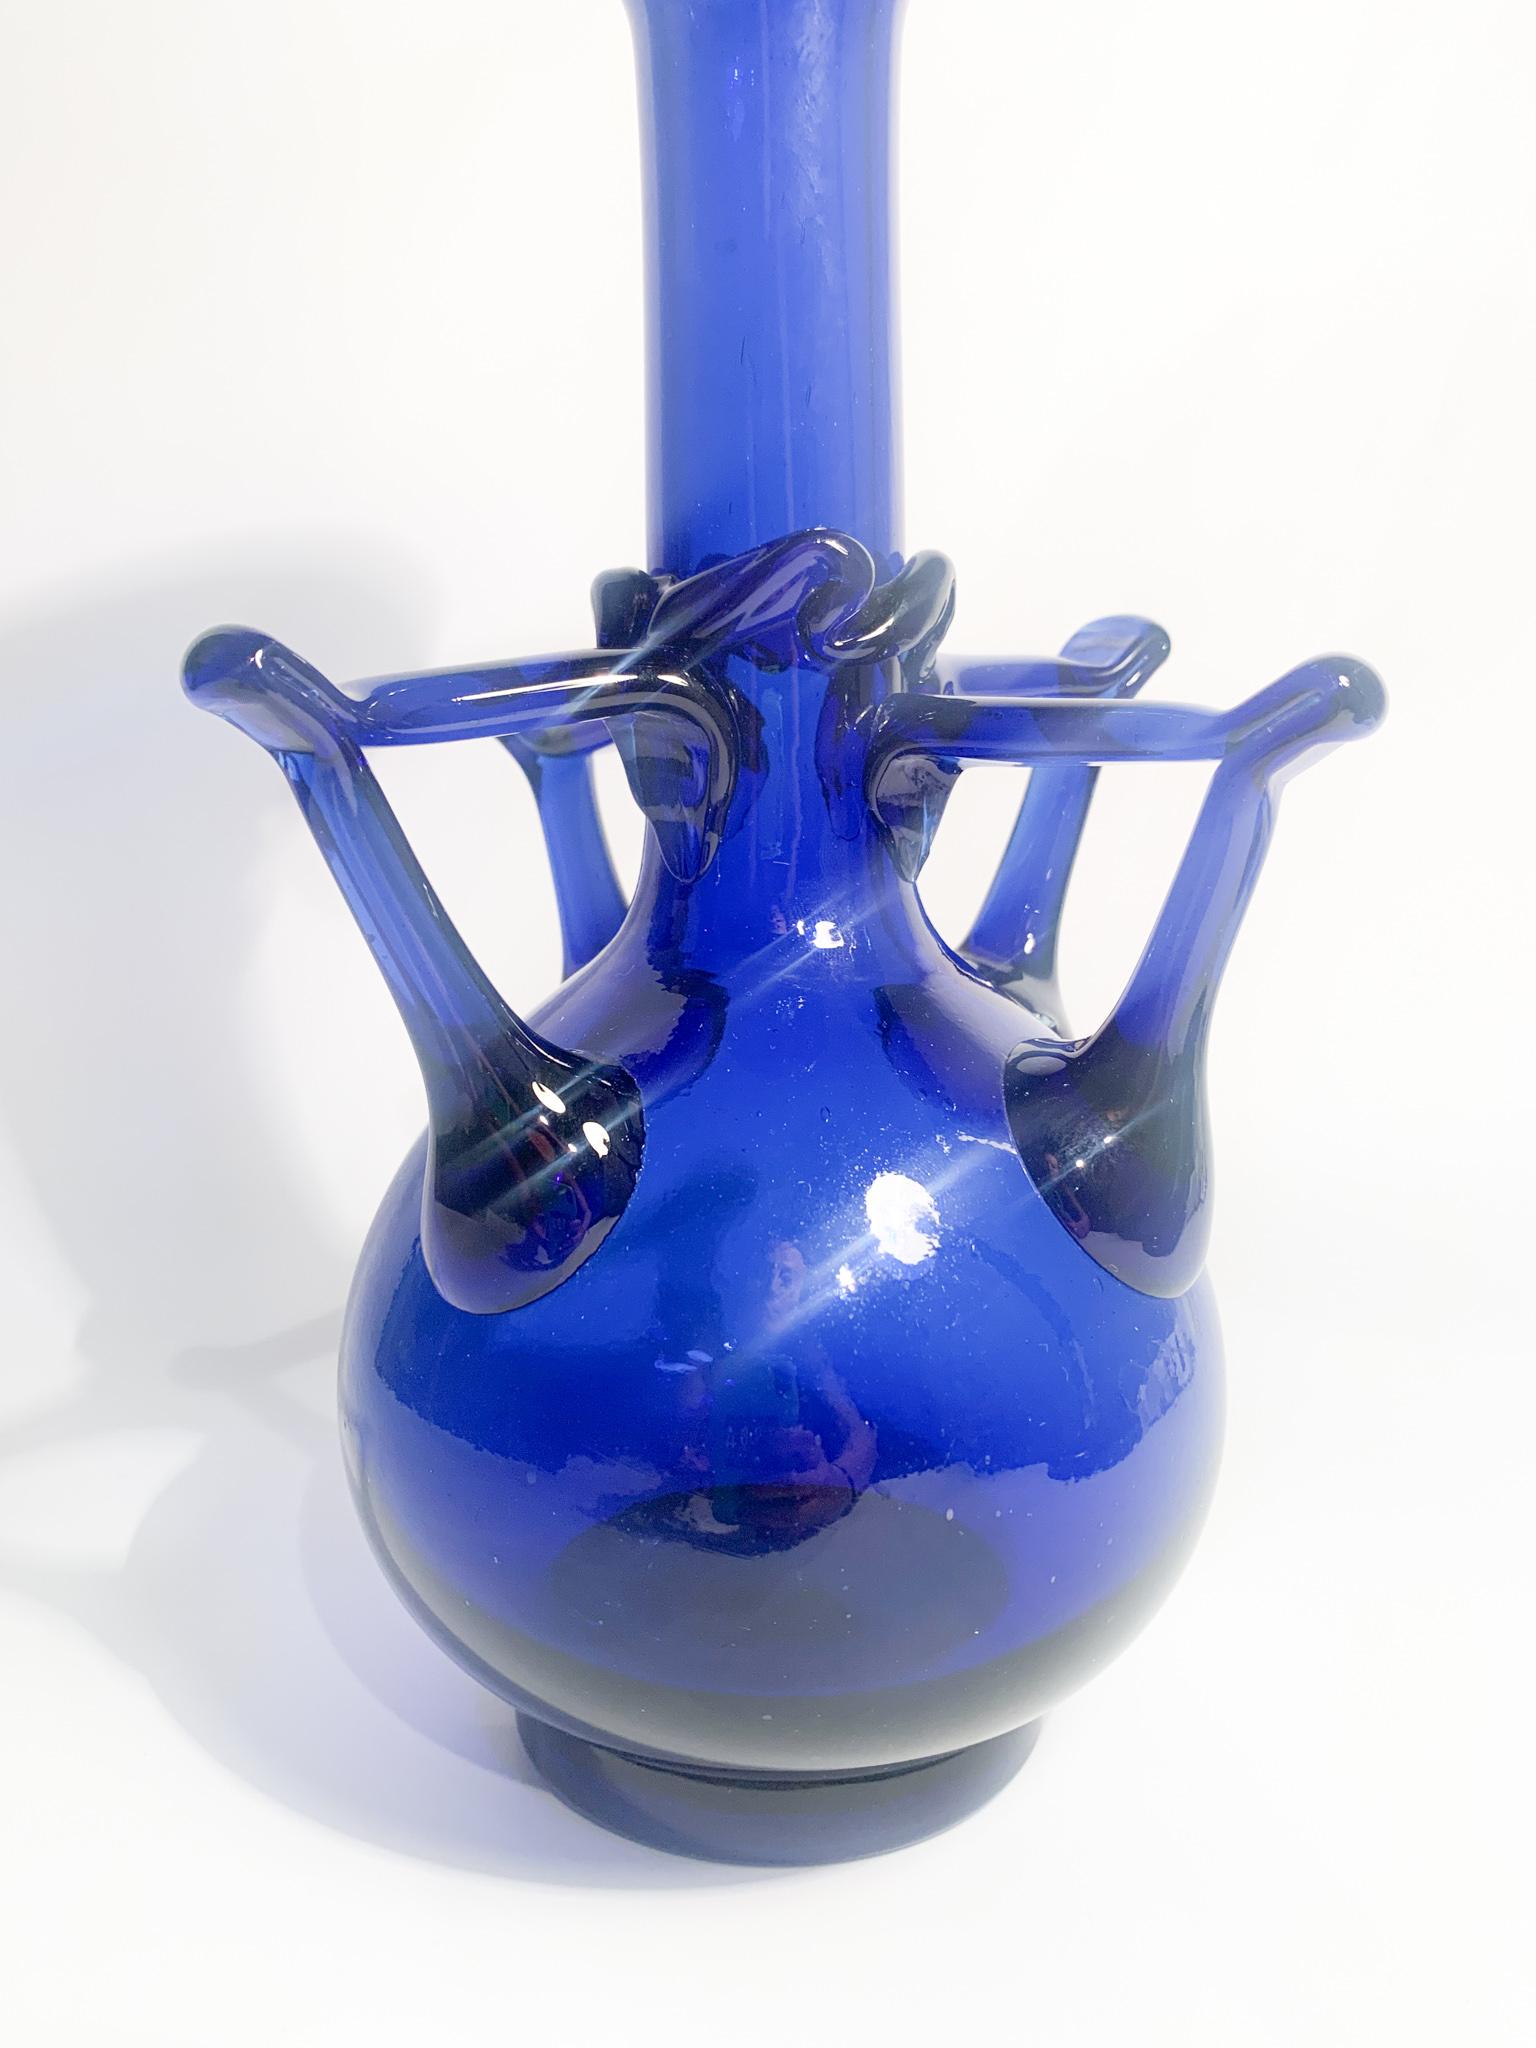 Italian Blue Murano Glass Vase Attributed to Fratelli Toso, 1940s For Sale 2